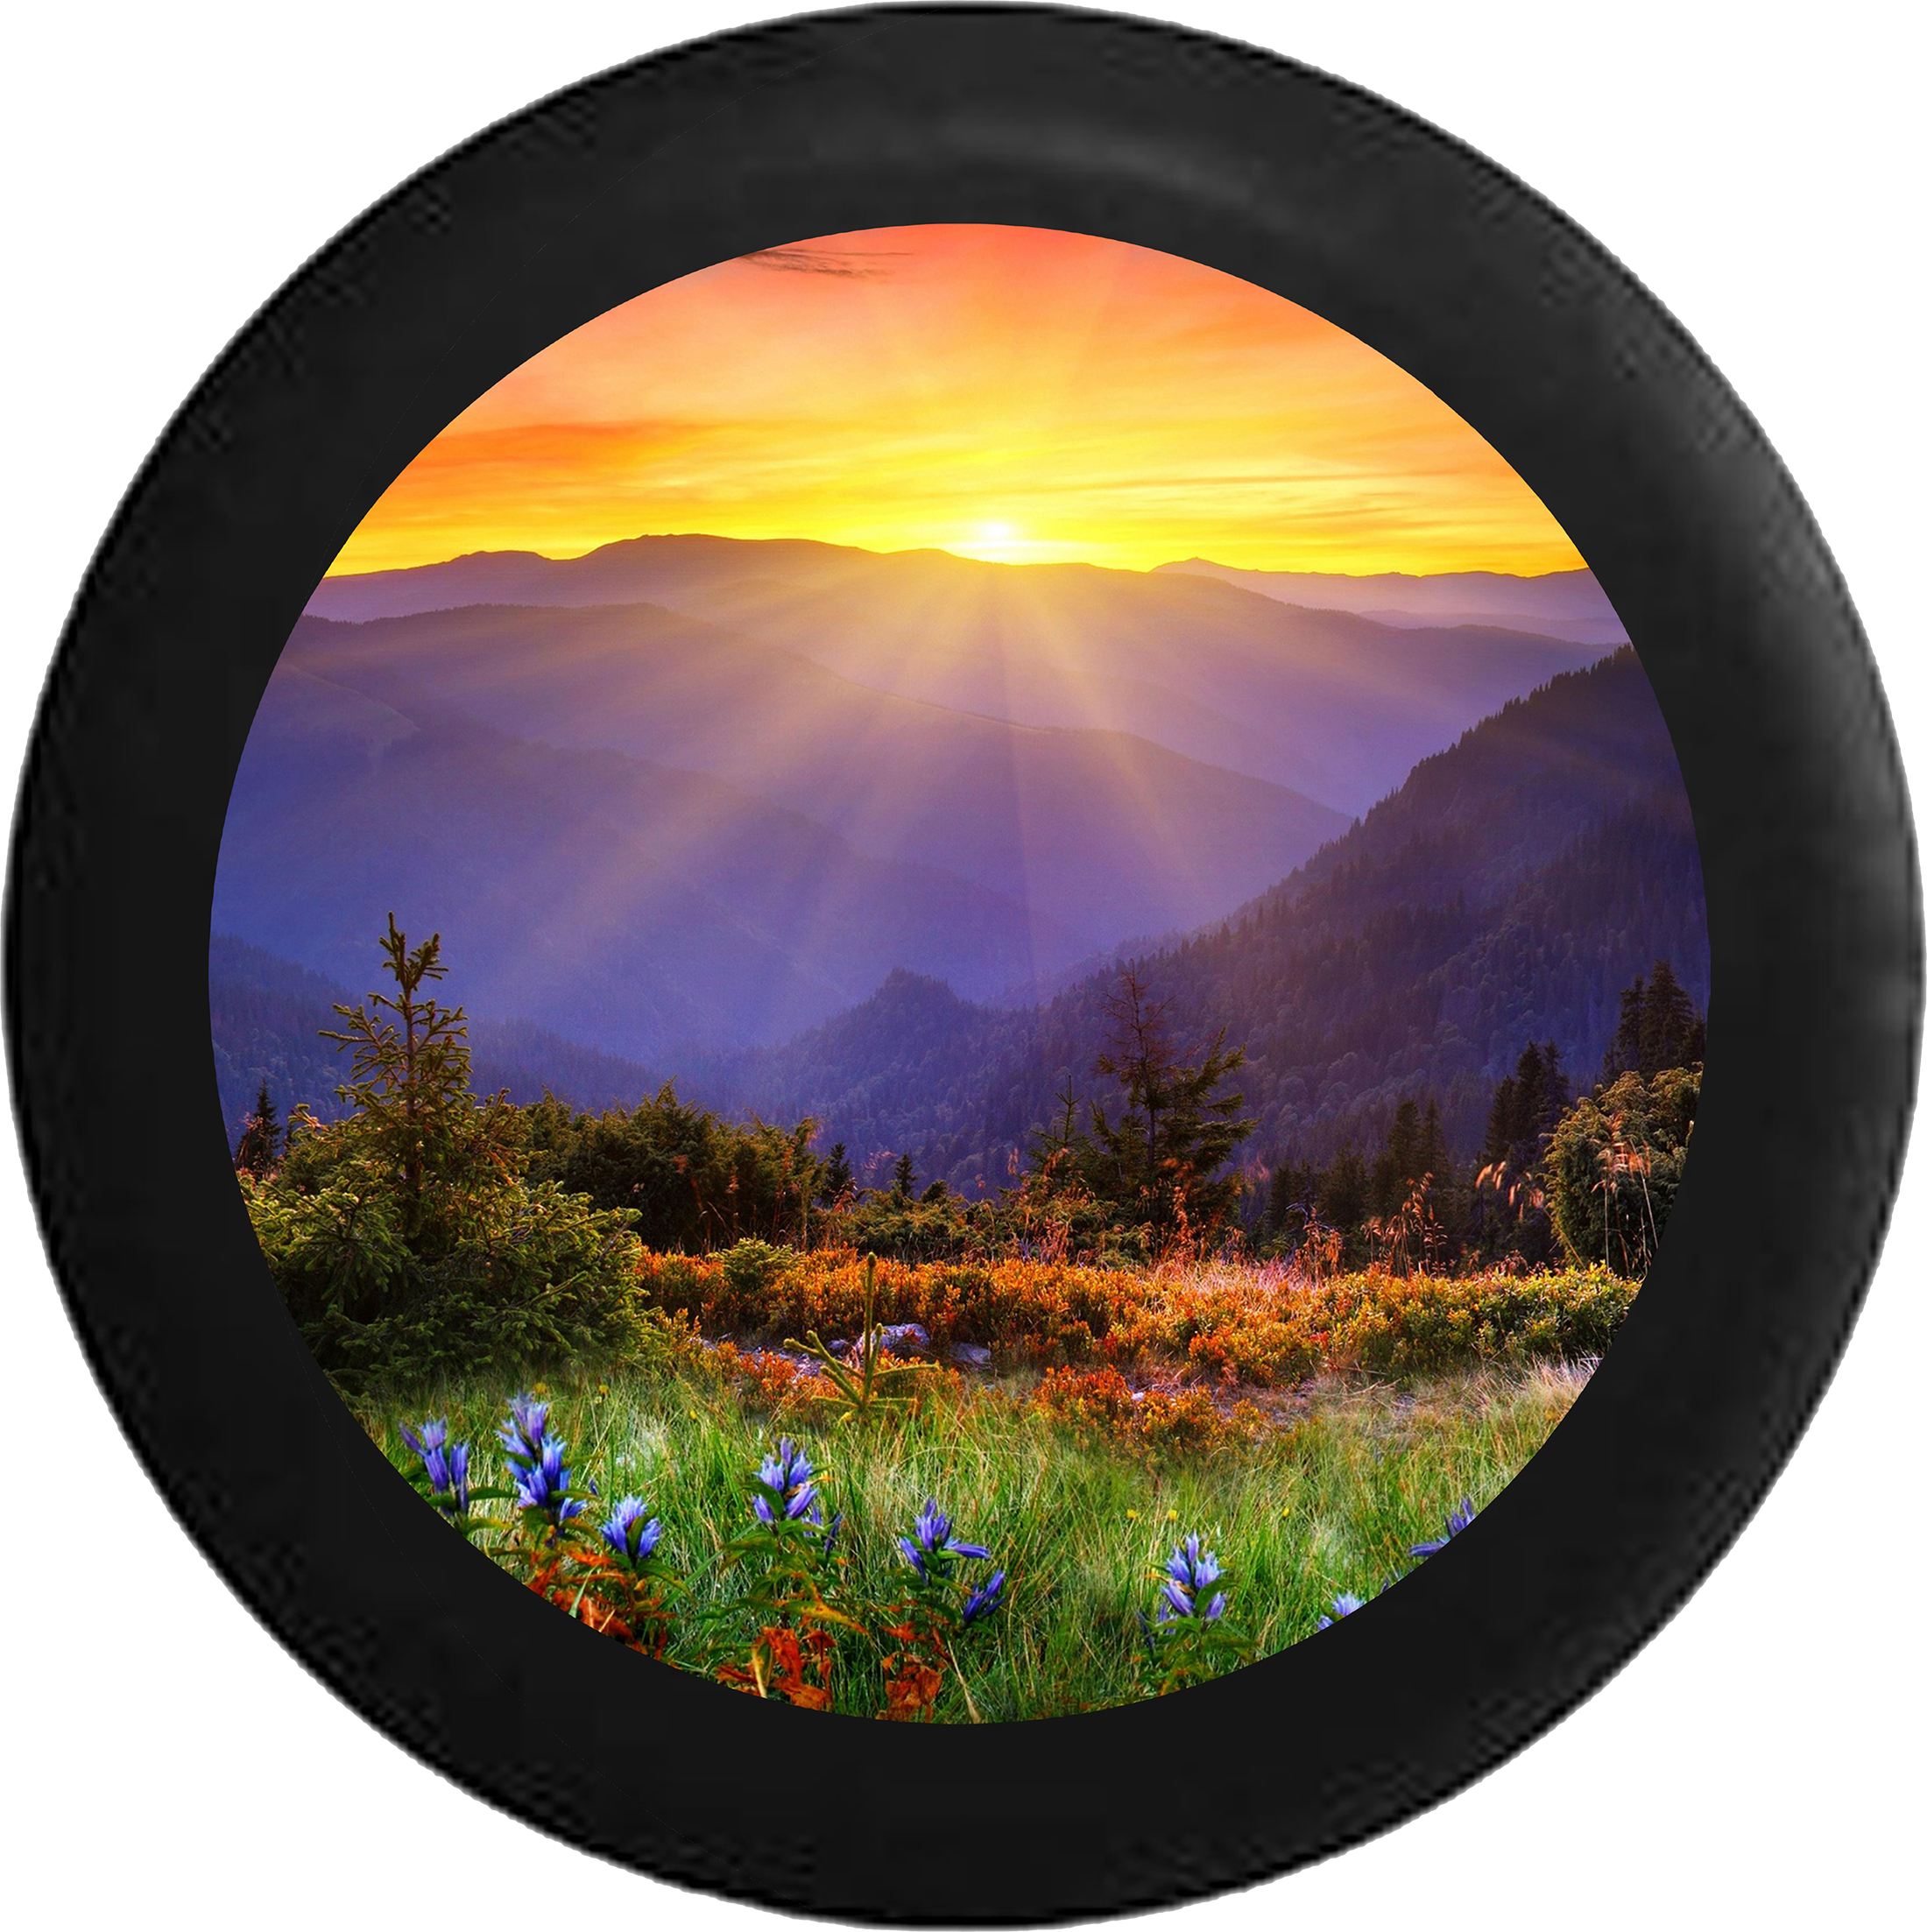 Sunrise Sunset Behind Mountain Range Field Of Flowers - Sacred Sanctuary Disk 2 (2200x2206), Png Download